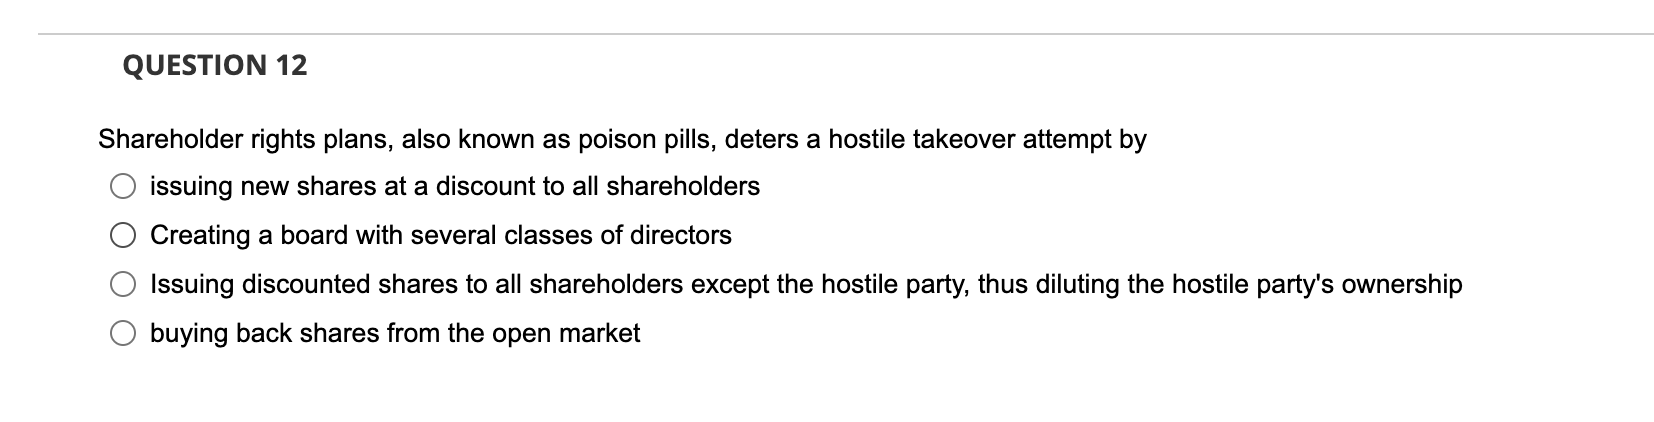 QUESTION 12 Shareholder rights plans, also known as poison pills, deters a hostile takeover attempt by